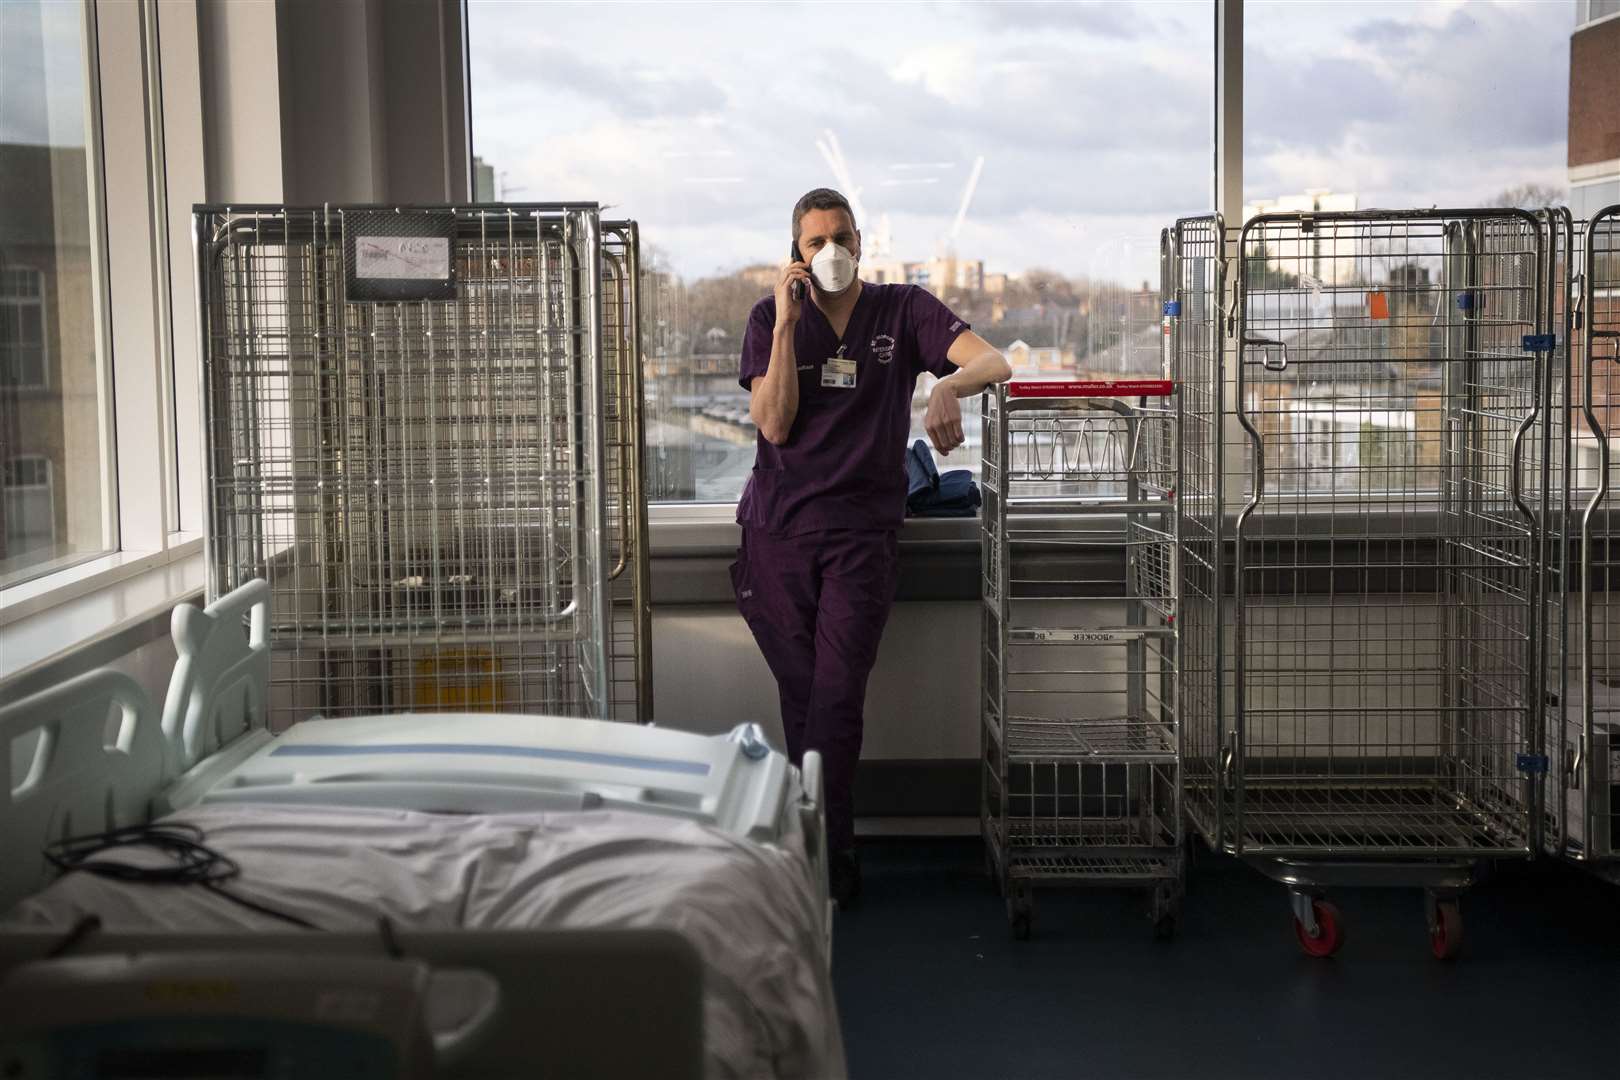 A consultant takes a moment to use his phone in the corridor of the ICU (Victoria Jones/PA)